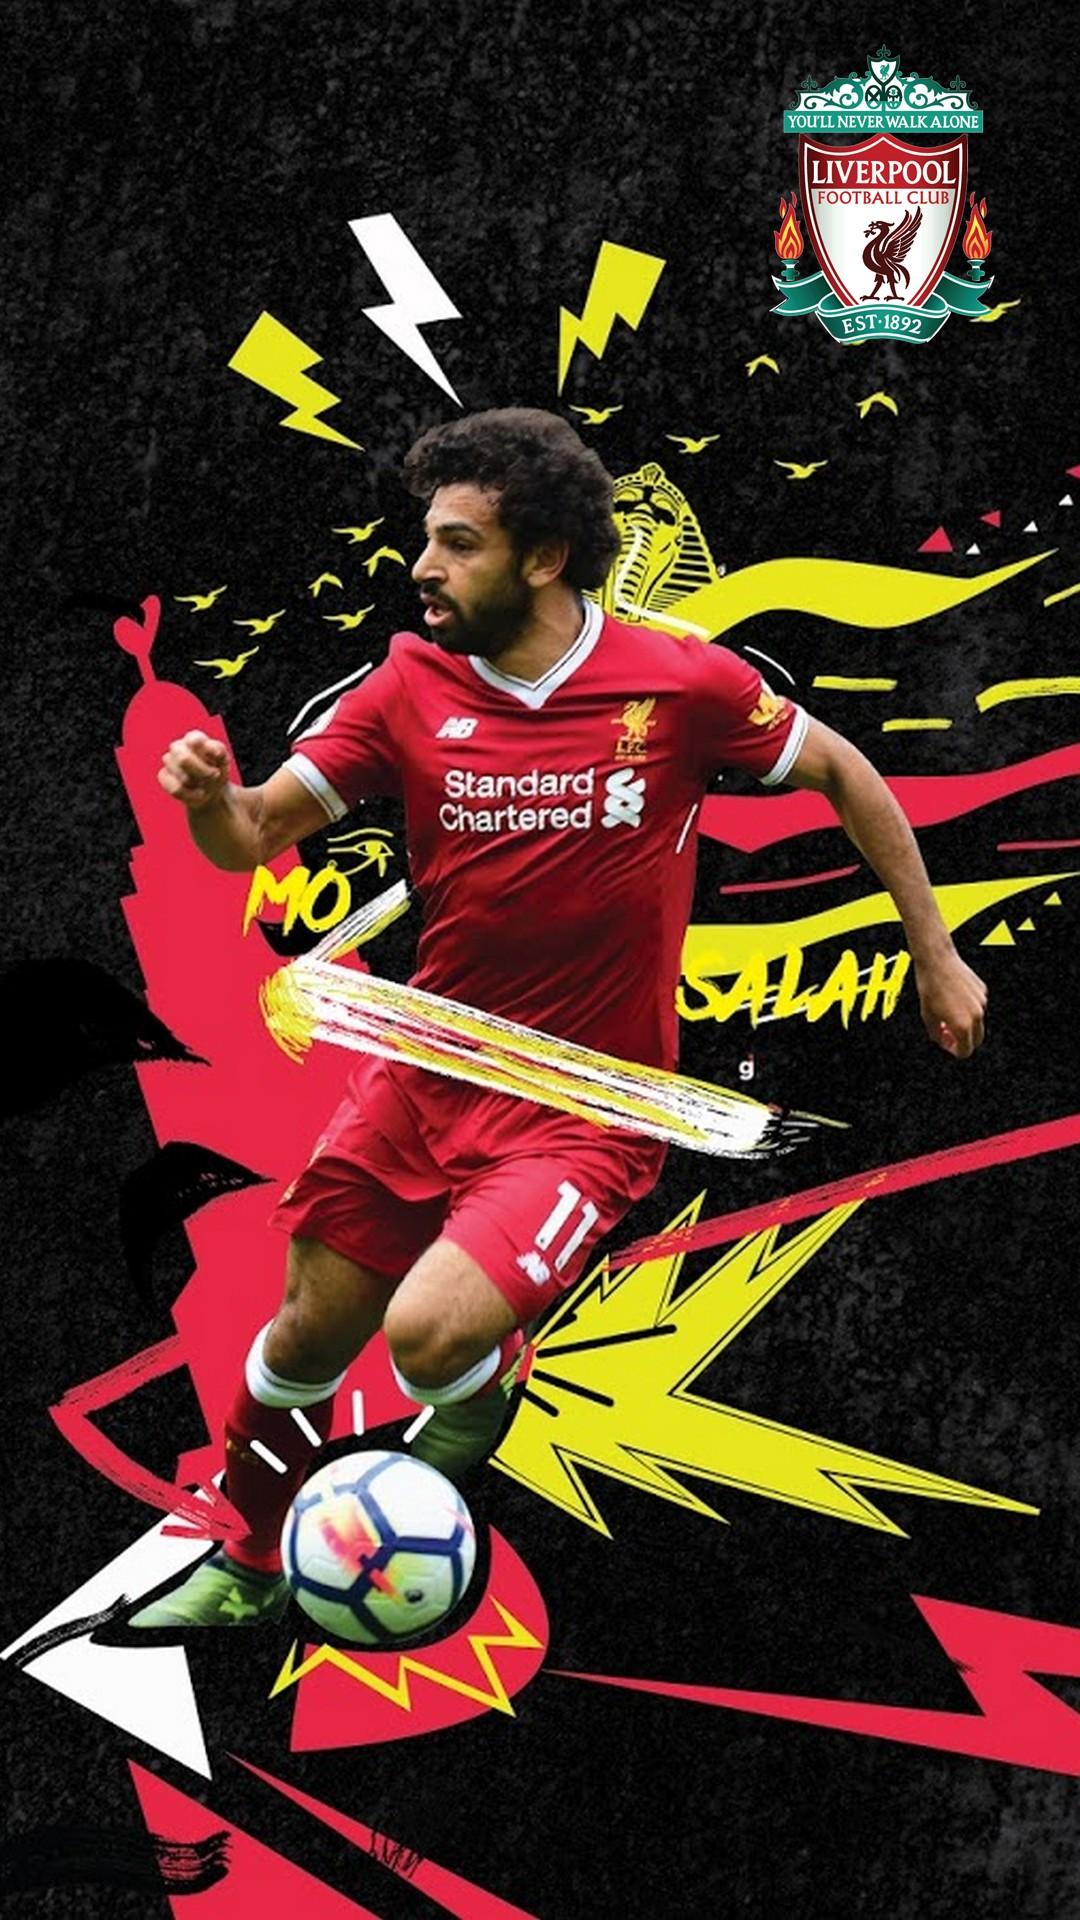 Free download Mohamed Salah Picture Wallpaper Android 2019 Android Wallpaper [1080x1920] for your Desktop, Mobile & Tablet. Explore Mohamed Salah 2019 Wallpaper. Mohamed Salah 2019 Wallpaper, Mohamed Salah UHD Wallpaper, Mohamed Salah